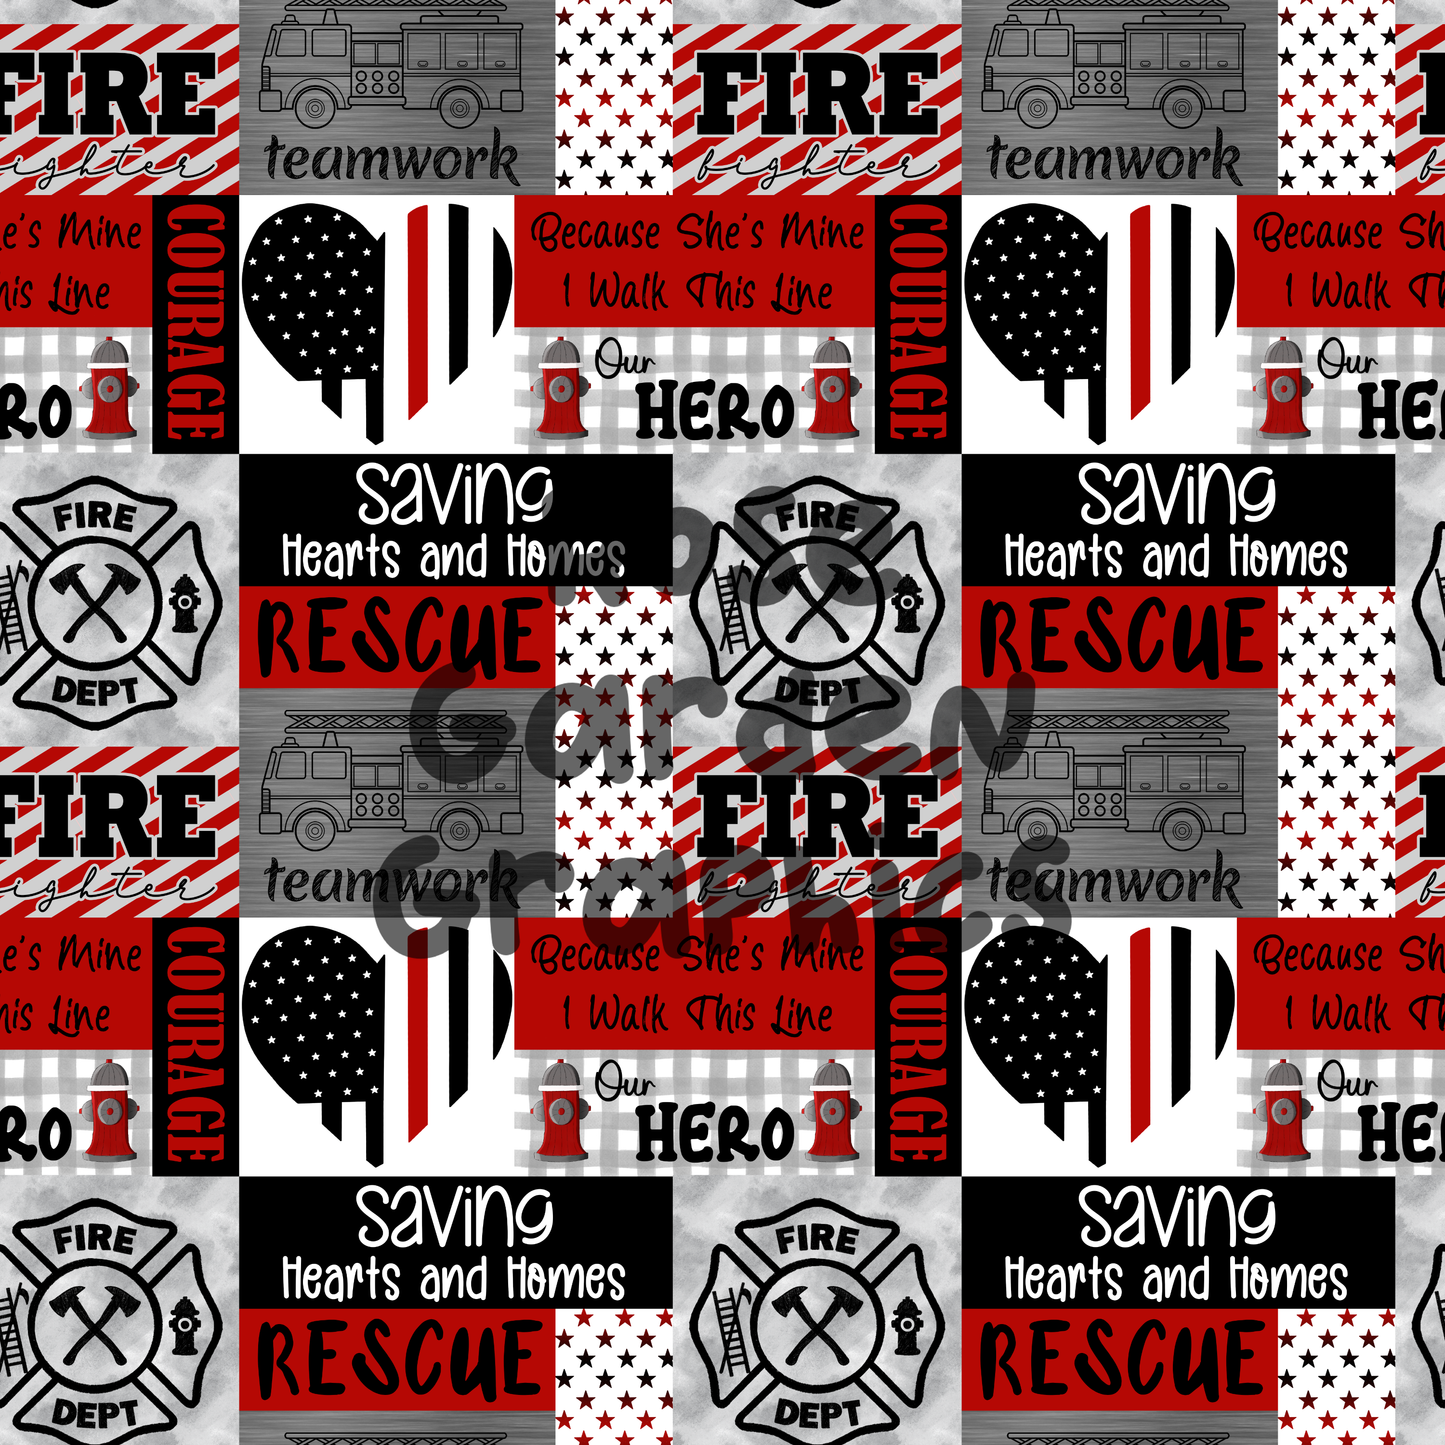 Firefighter Collage 2 Seamless Images Bundle